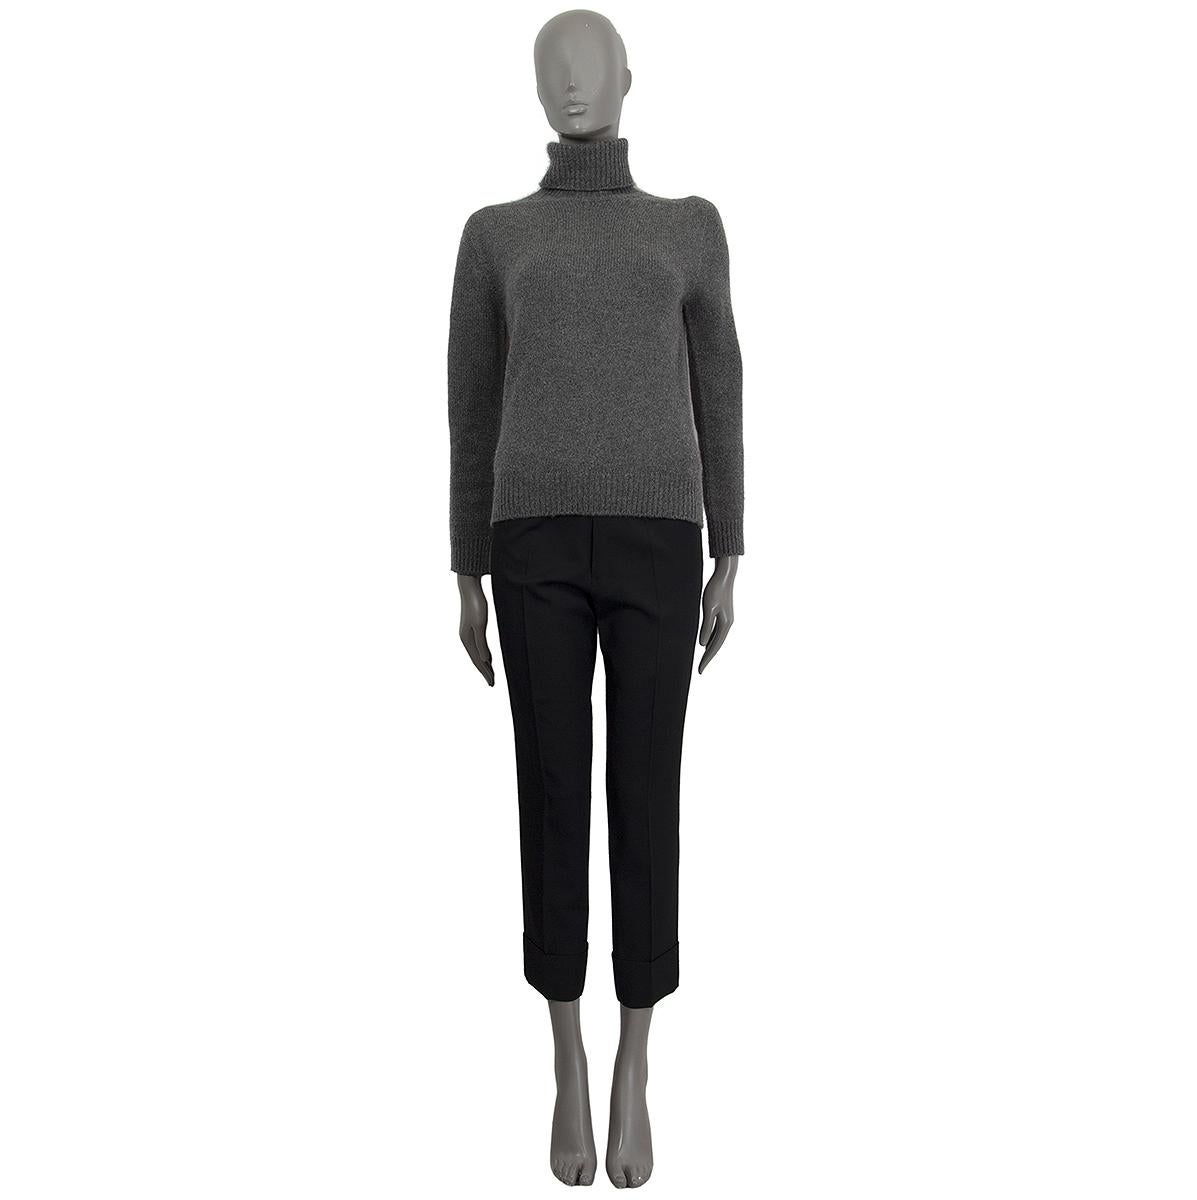 100% authentic Celine turtleneck sweater in grey cashmere (assumingly as content tag is missing). Has been worn and is in excellent condition.

Measurements
Tag Size	Missing Tag
Size	XS
Bust	86cm (33.5in) to 92cm (35.9in)
Waist	82cm (32in) to 92cm